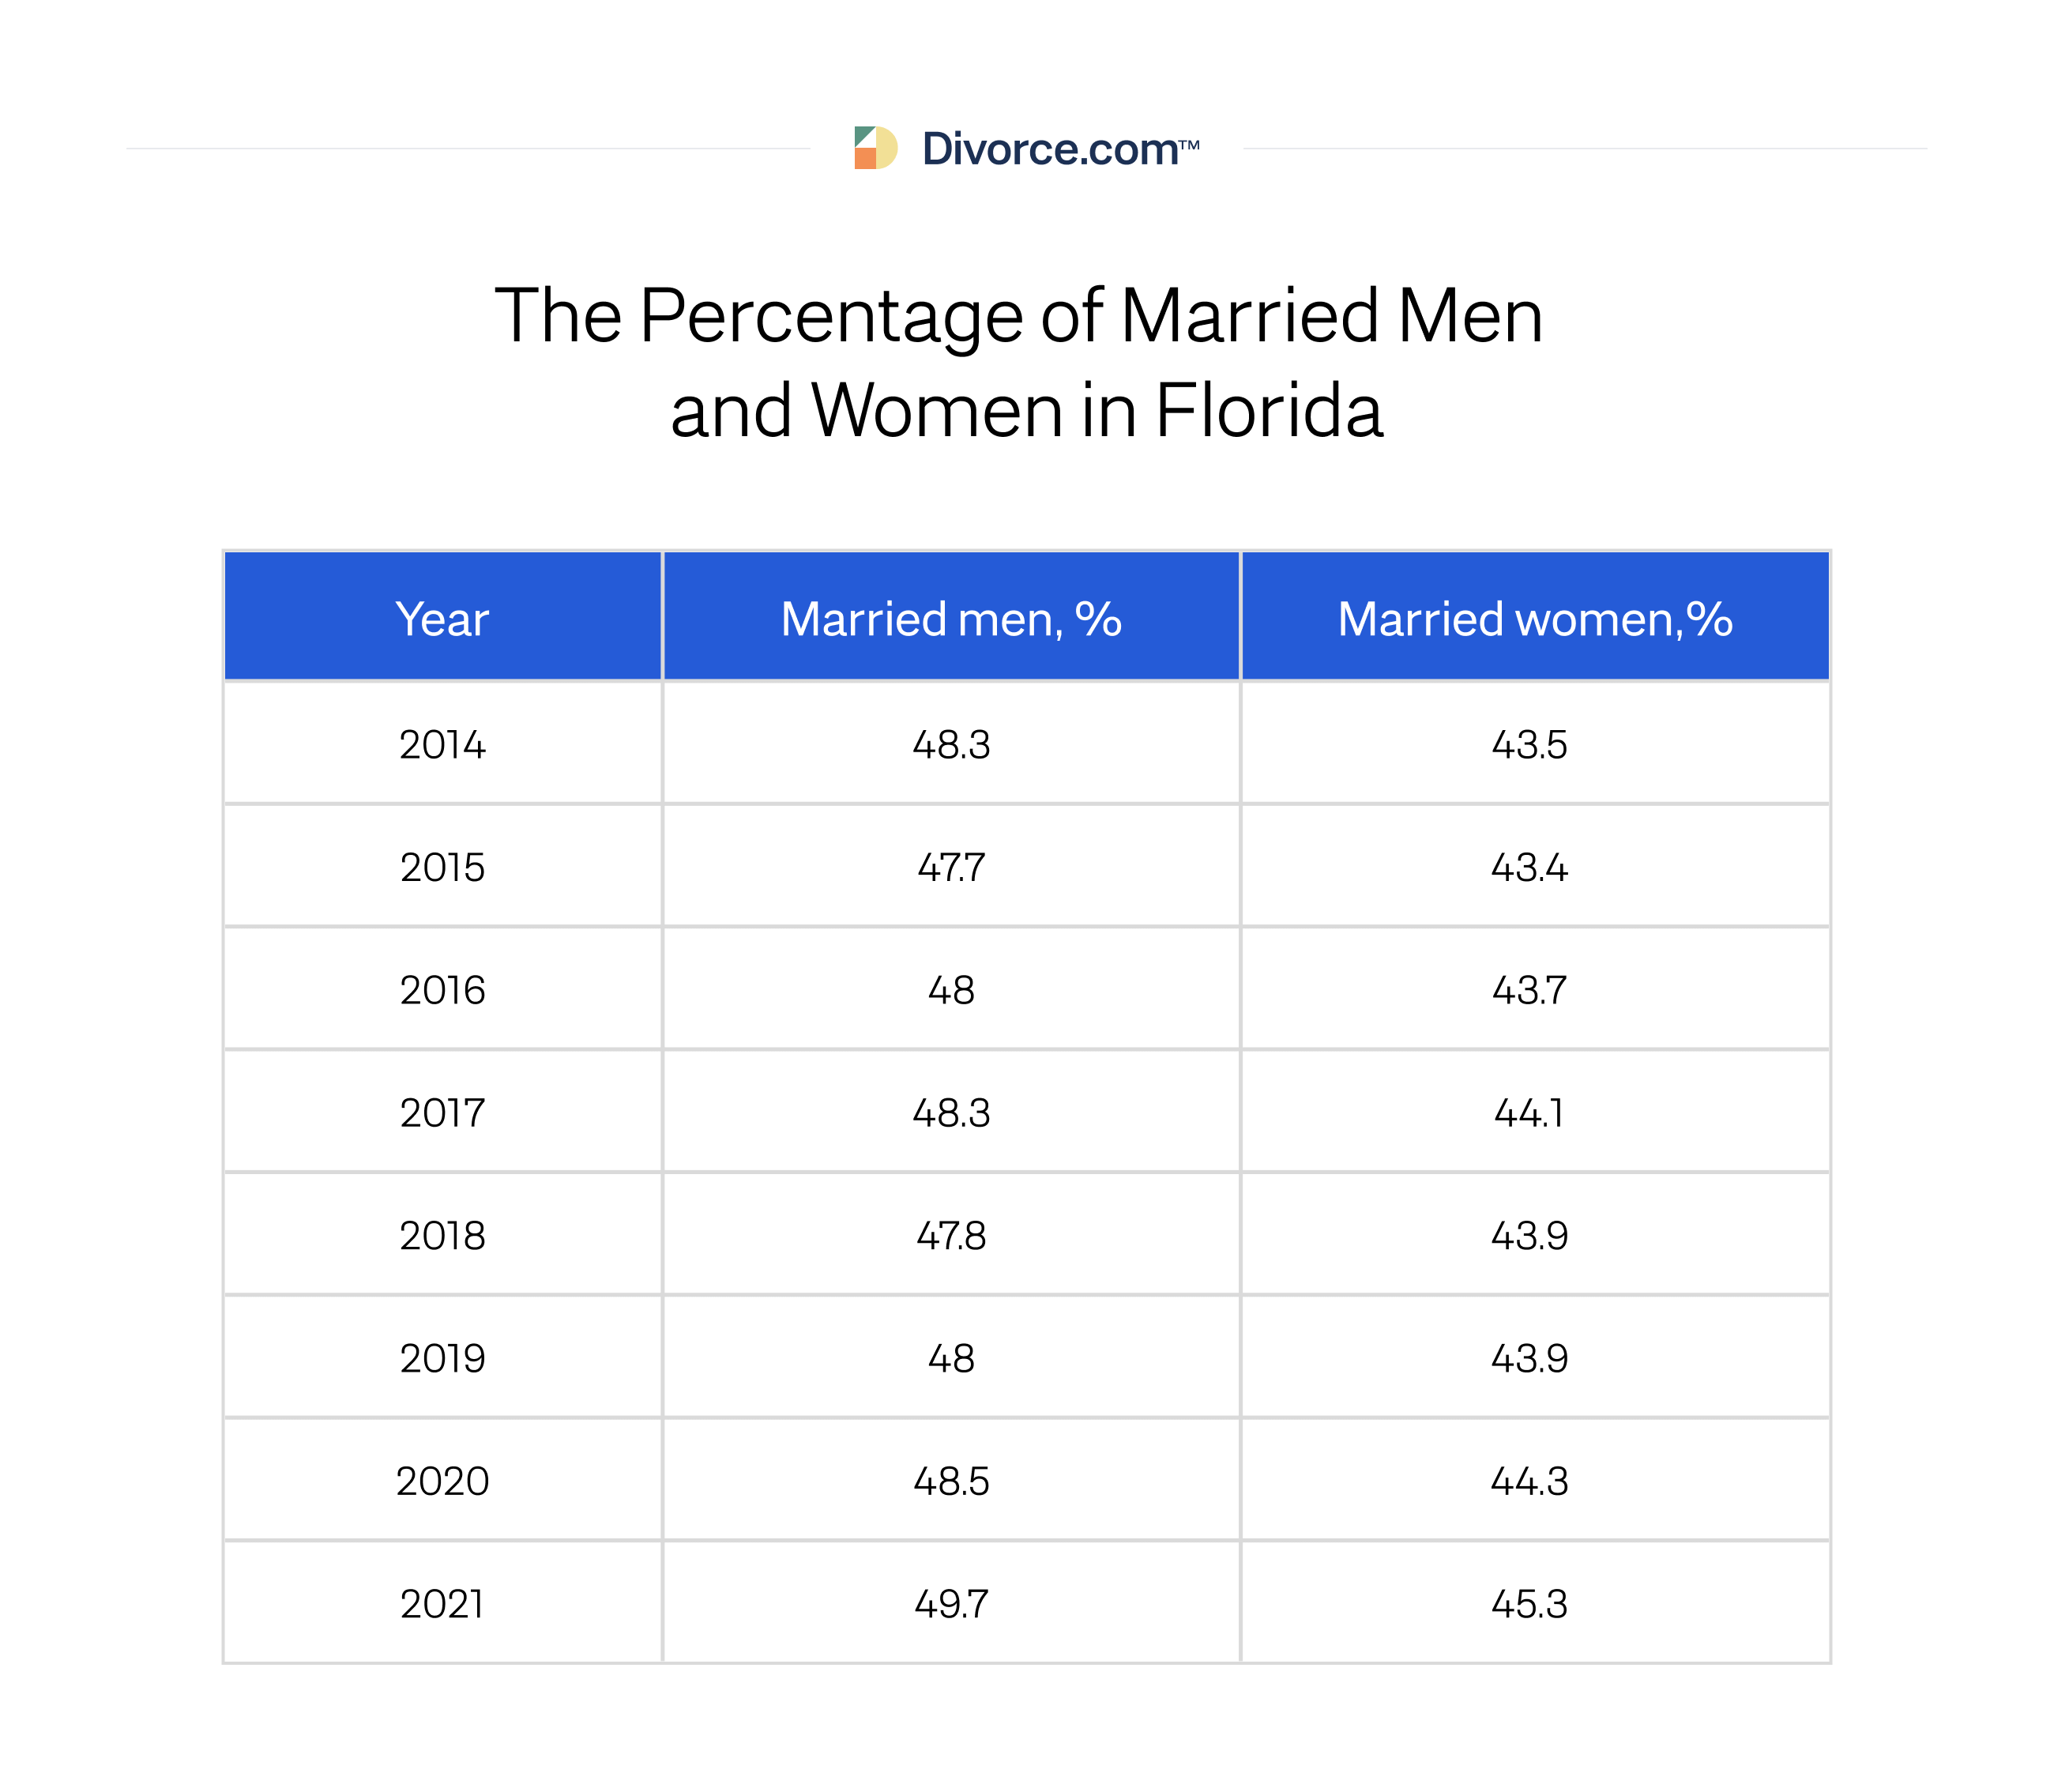 The difference between the men’s and women’s marriage rates by year is noticeable in Florida. In particular, men get married more often than women.